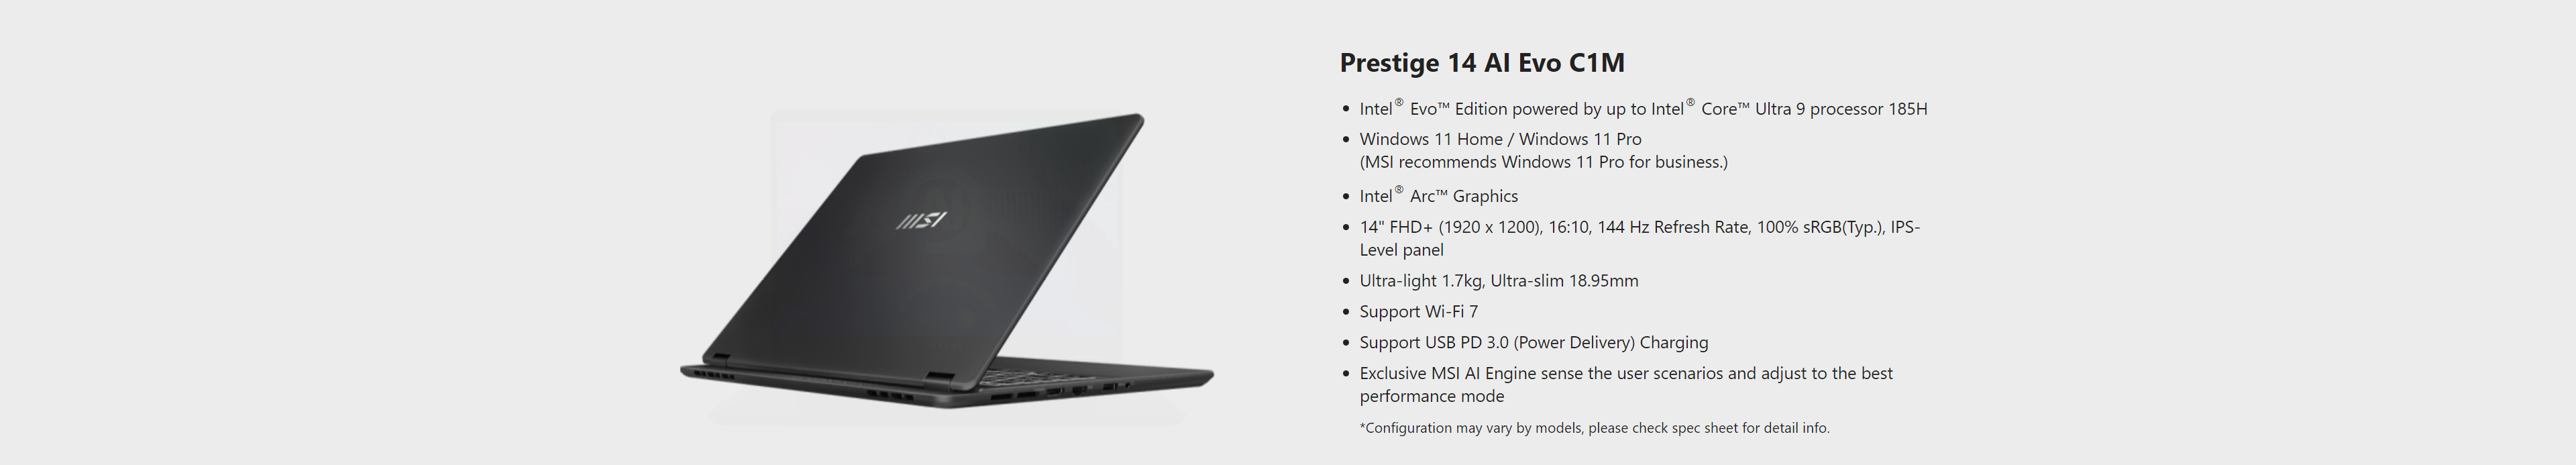 A large marketing image providing additional information about the product MSI Prestige 14 AI Evo C1MG-017AU 14" 144Hz Ultra 5 125H Win 11 Notebook - Additional alt info not provided